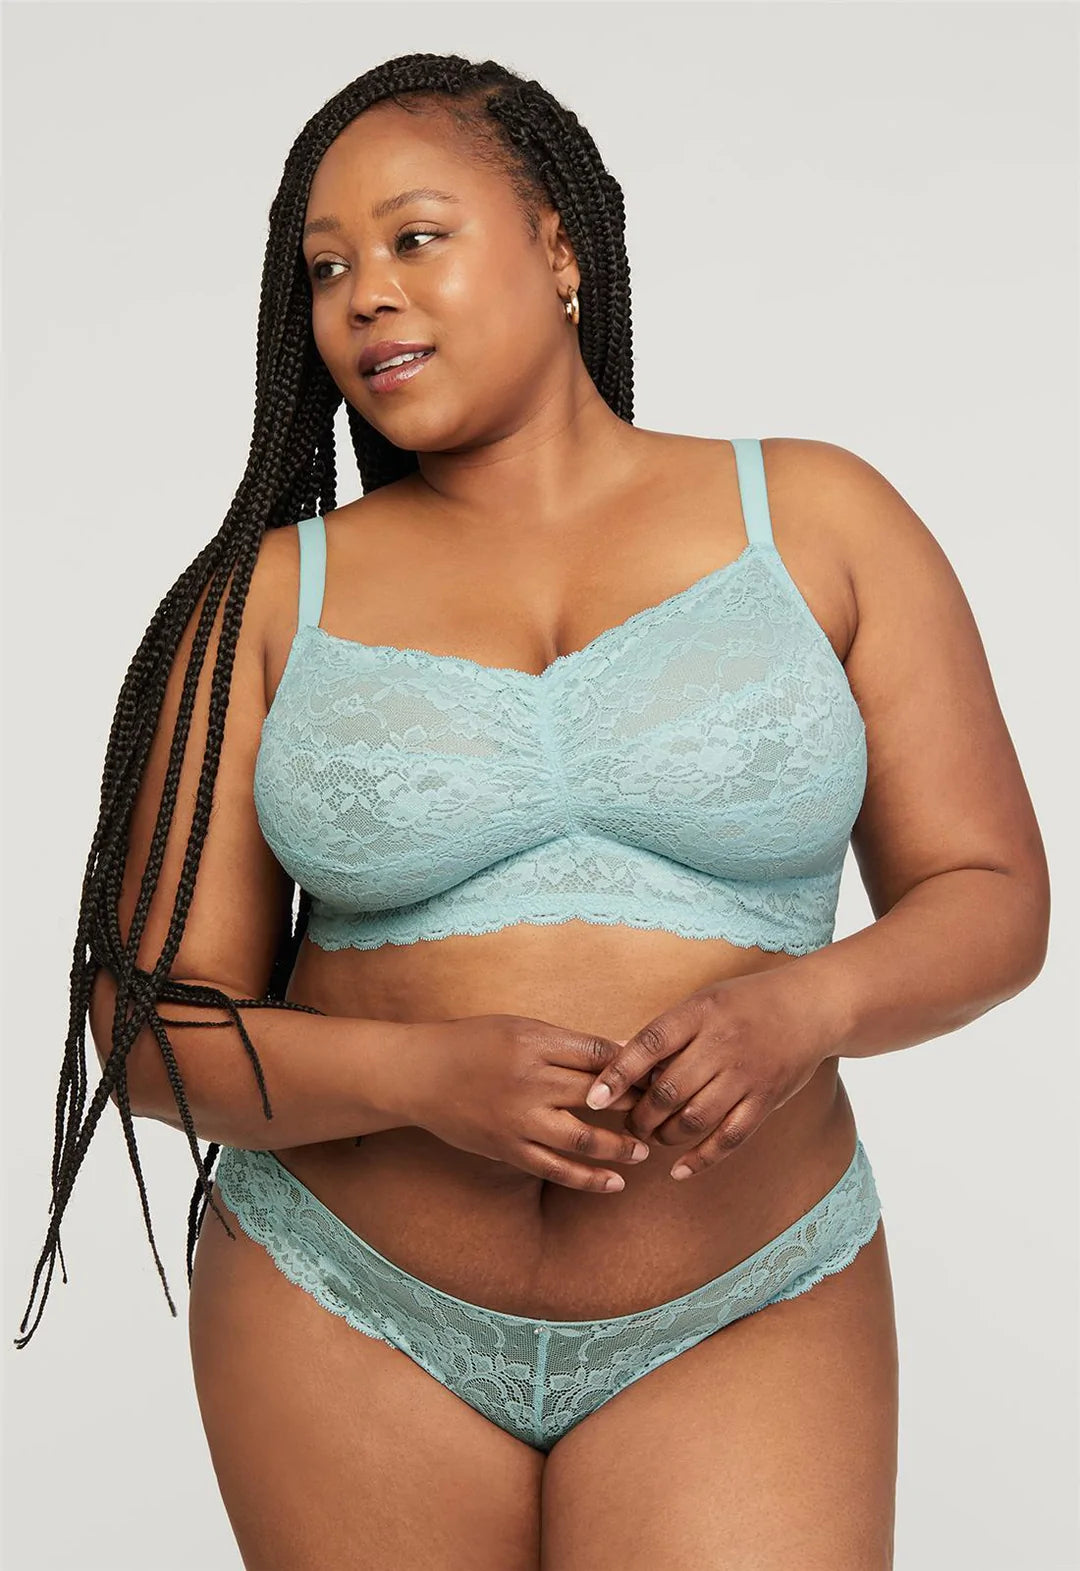 Size 34H Supportive Plus Size Bras For Women